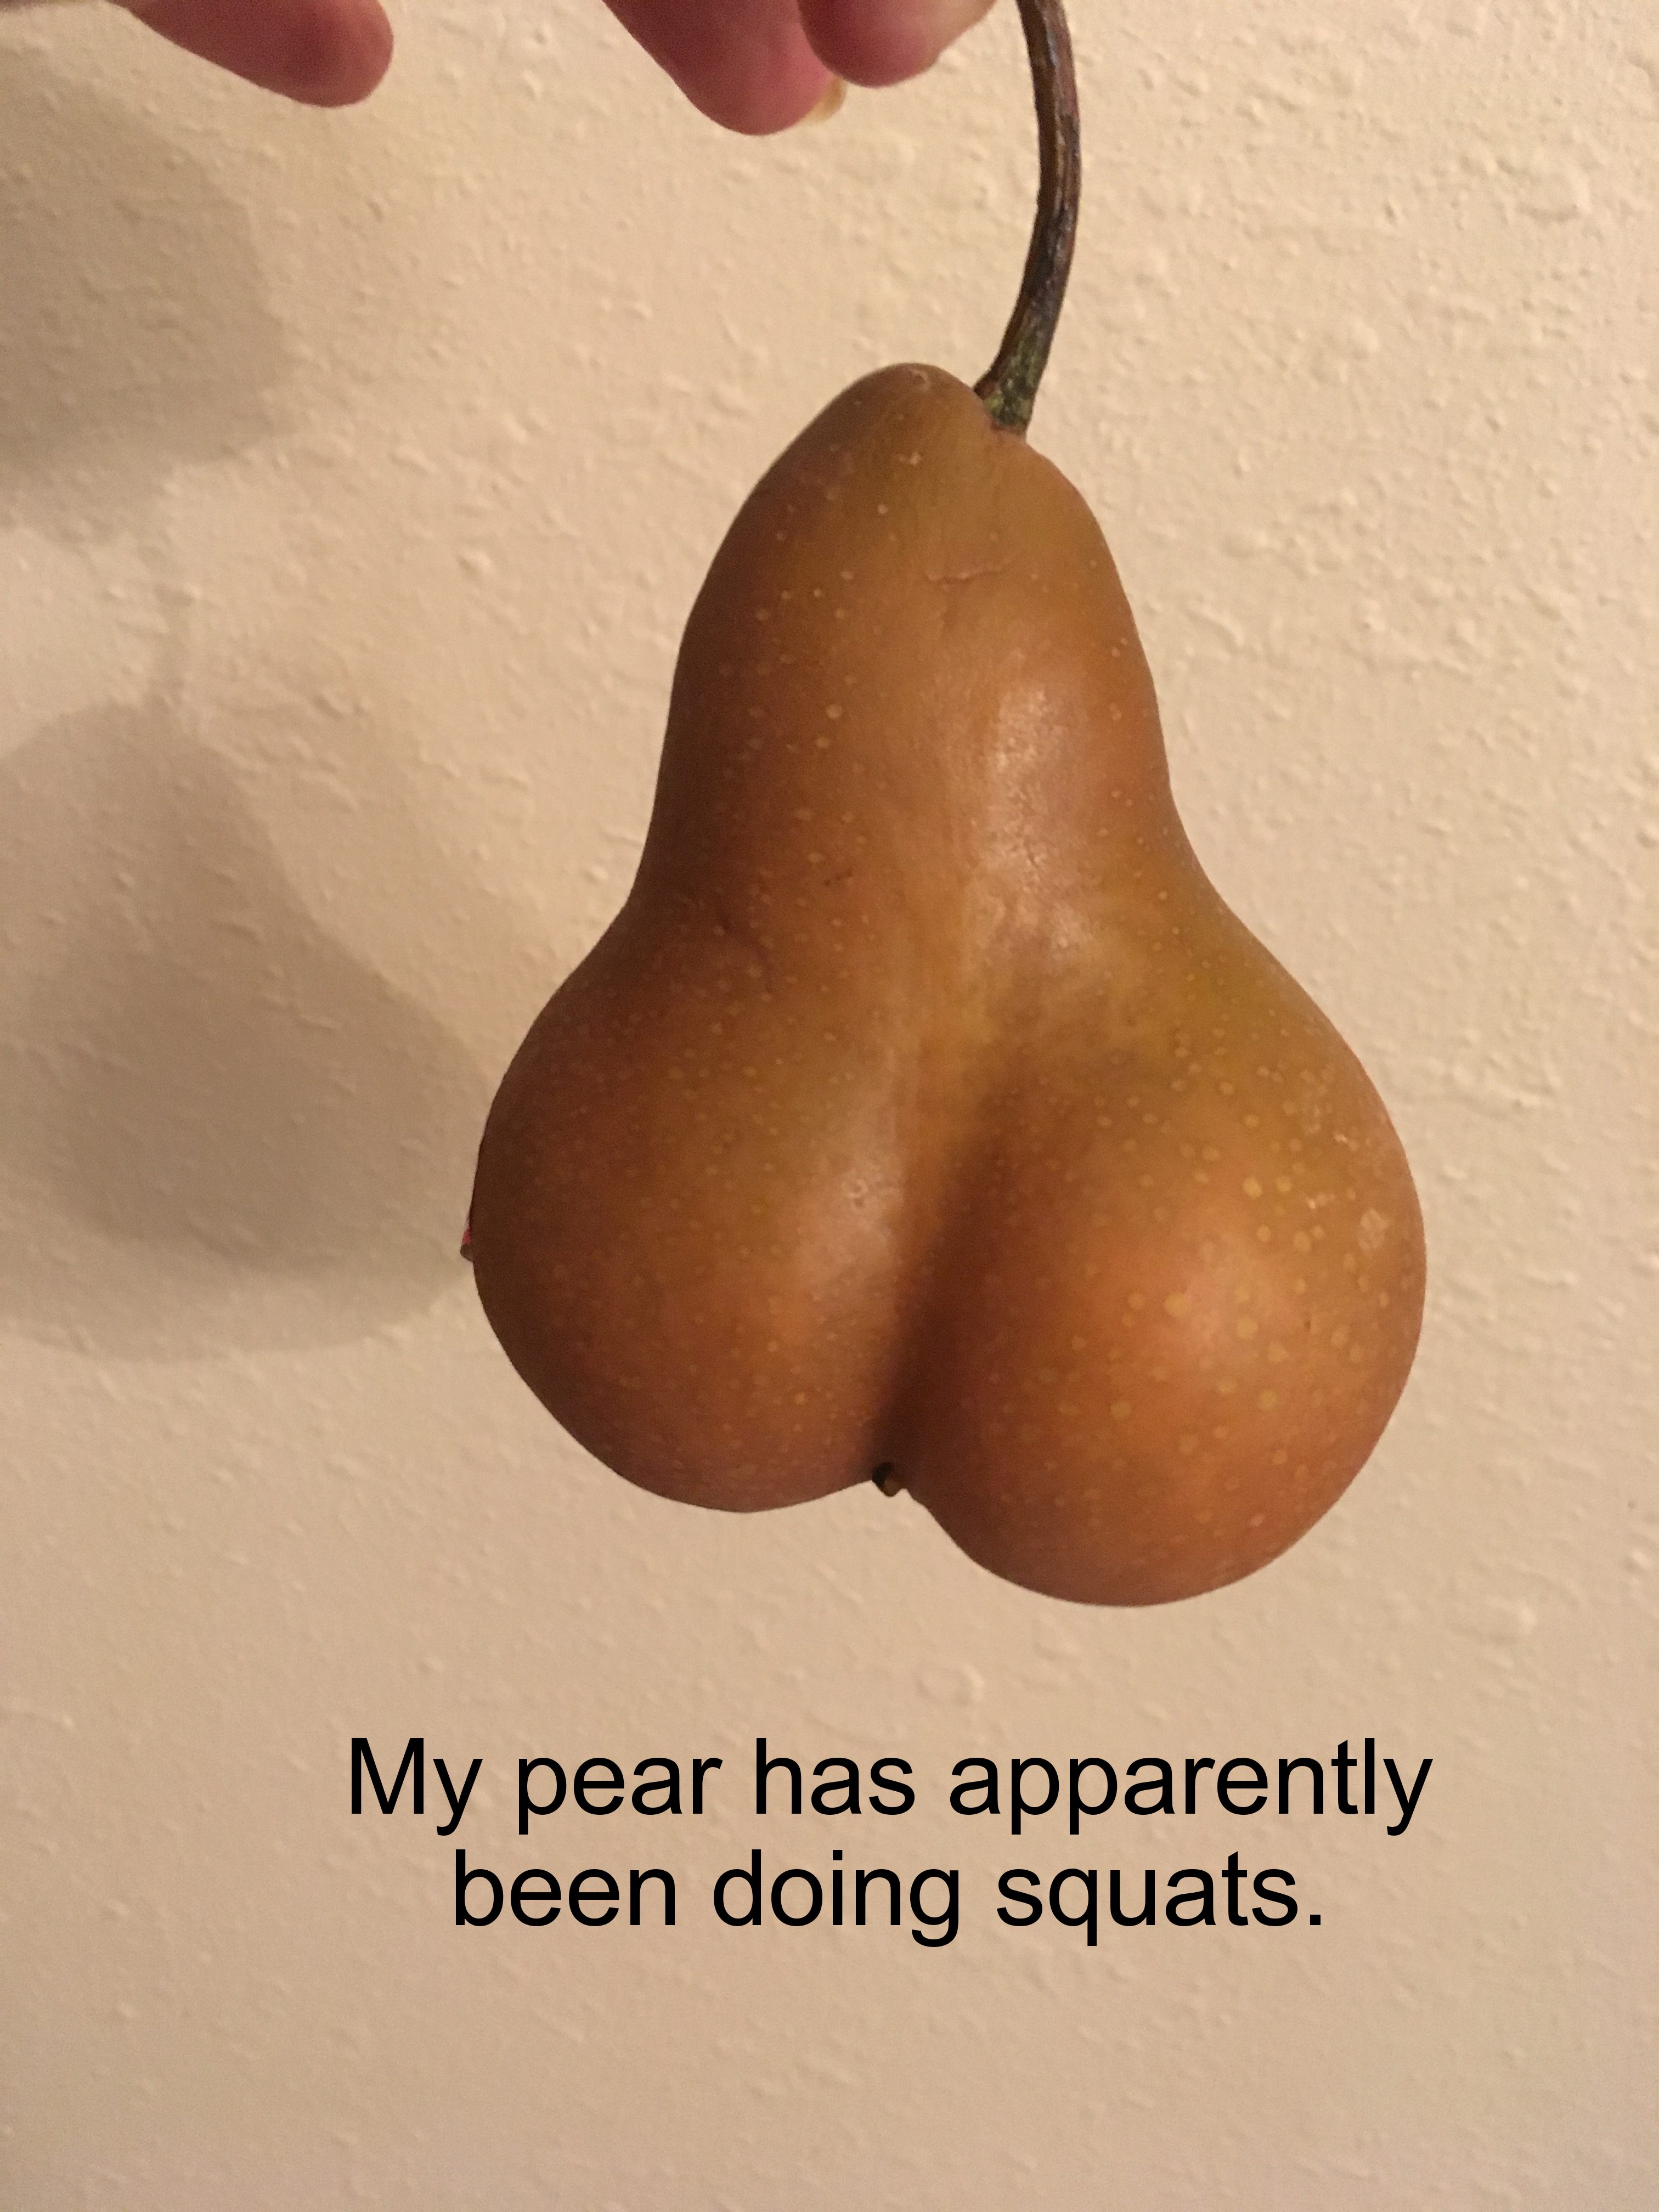 japanese symbol for hope - My pear has apparently been doing squats.